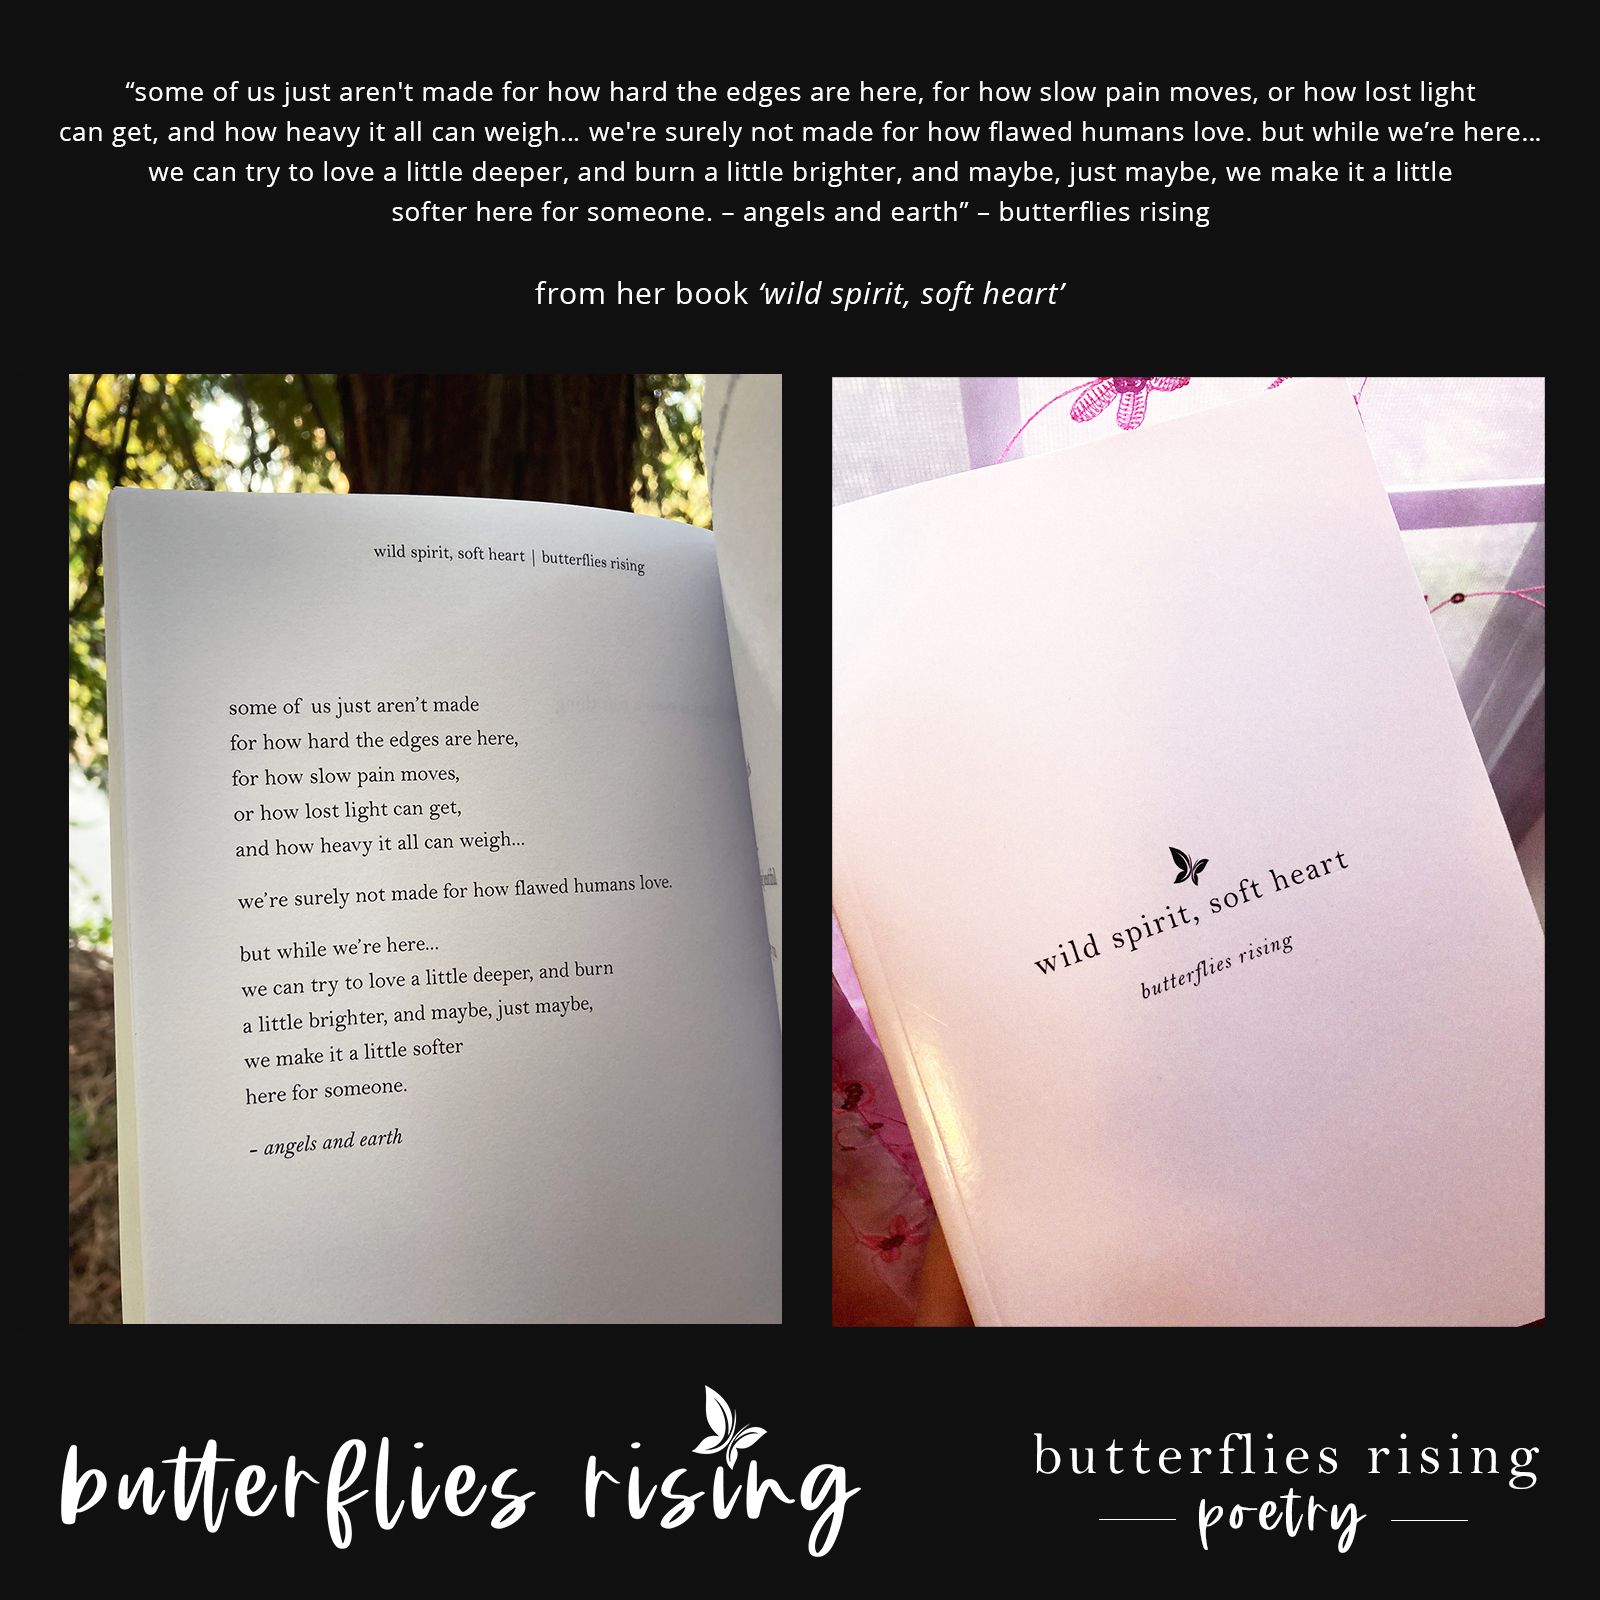 some of us just aren't made for how hard the edges are here - butterflies rising